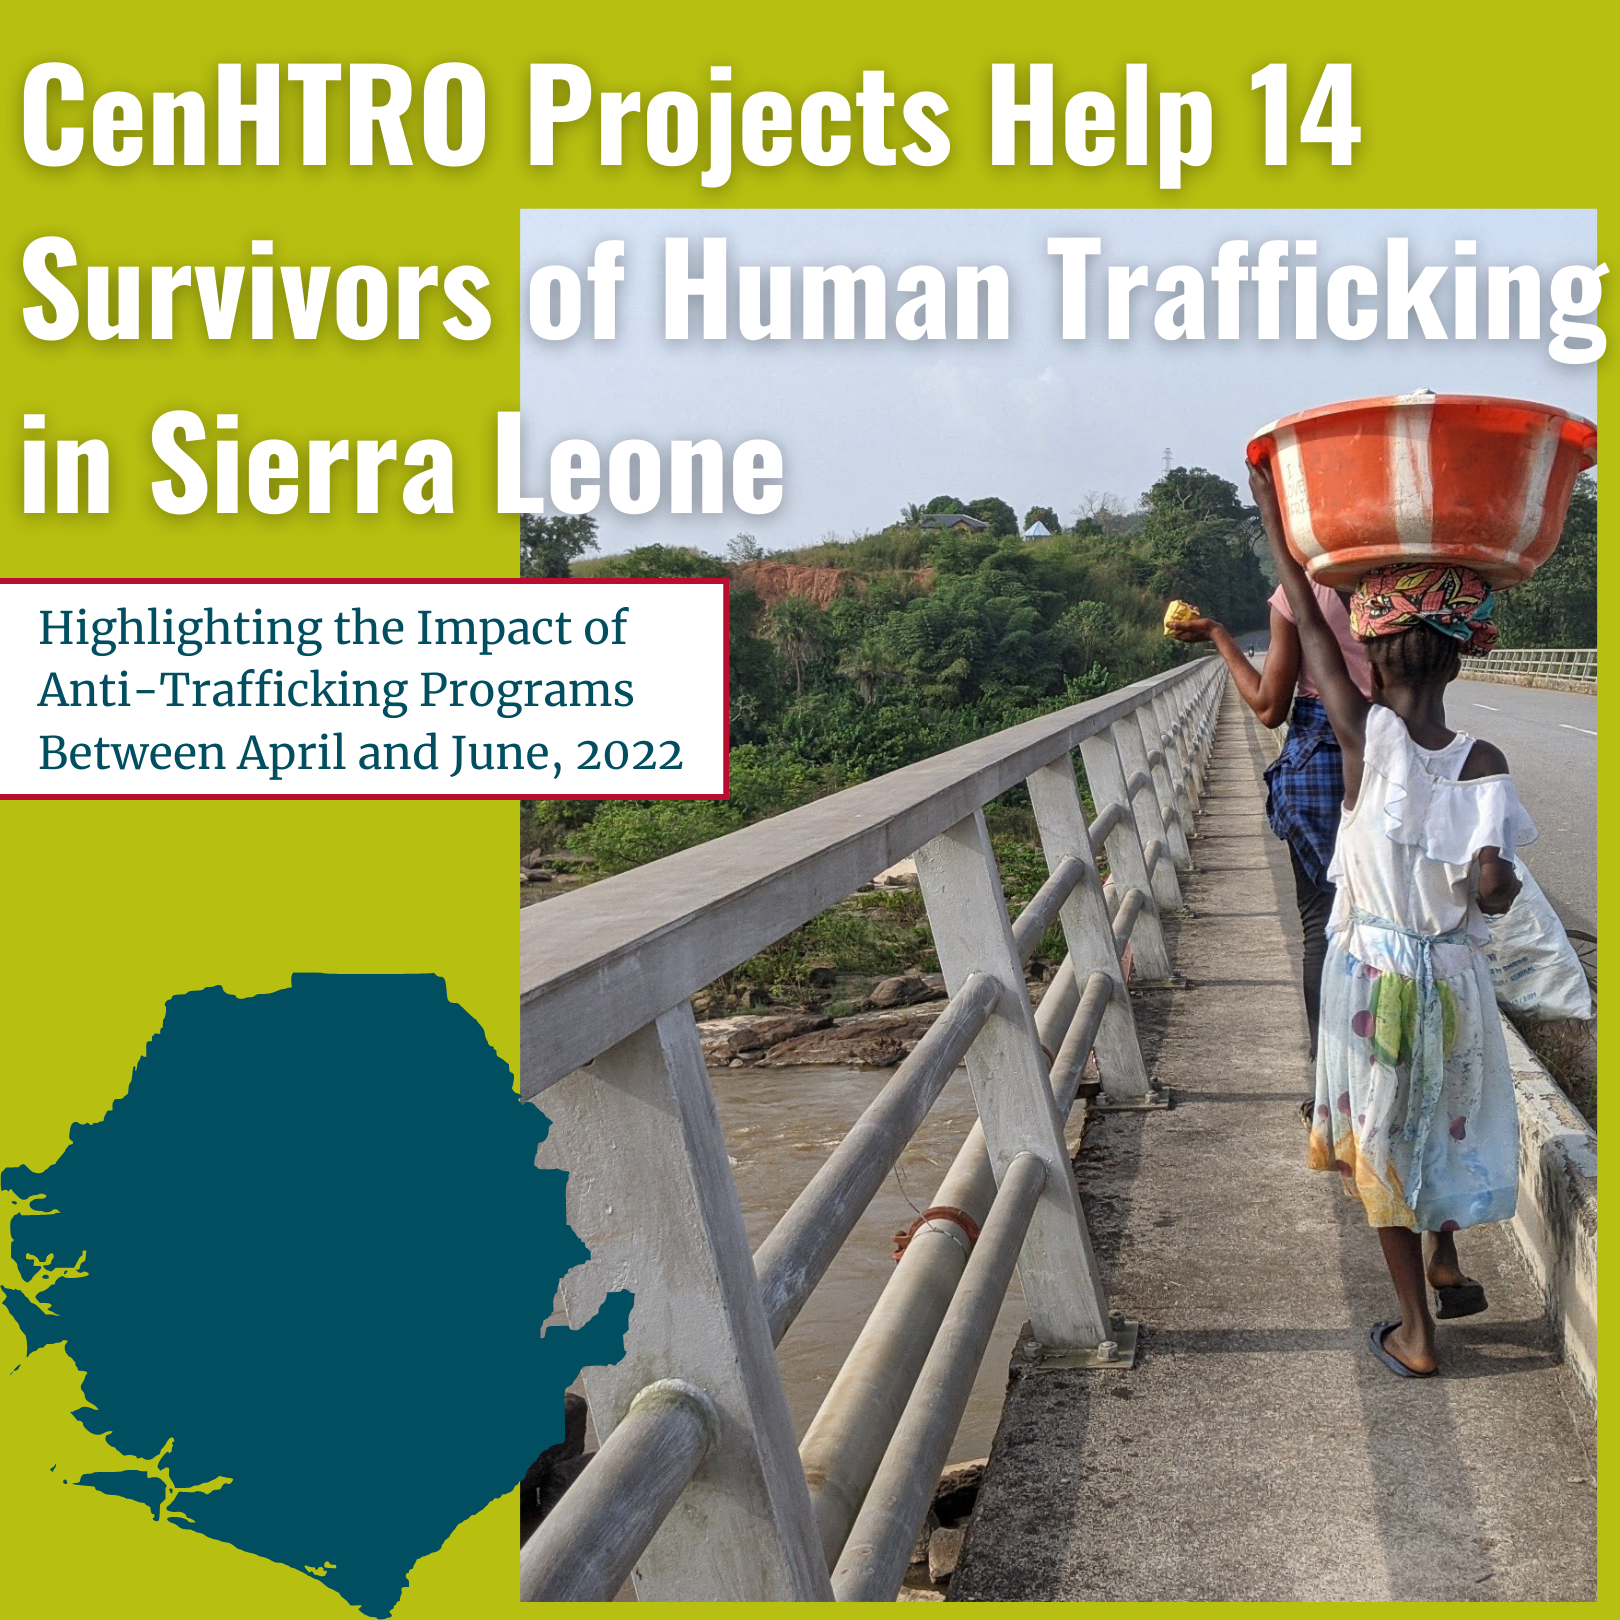 CenHTRO Anti-Trafficking Impact in Sierra Leone between April and June 2022